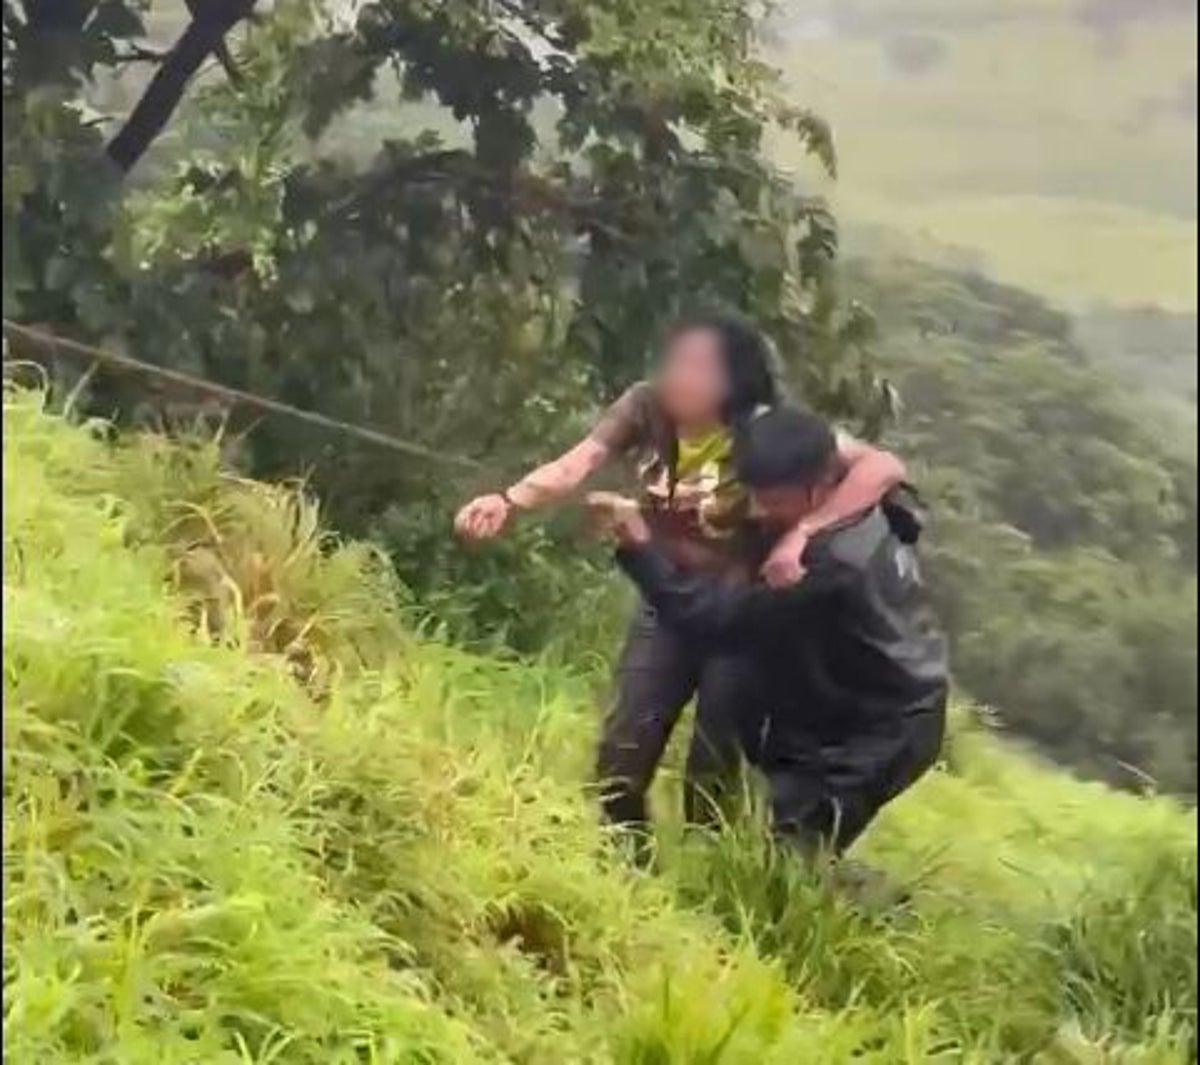 Woman, 29, rescued after falling into 100ft deep gorge while taking selfie